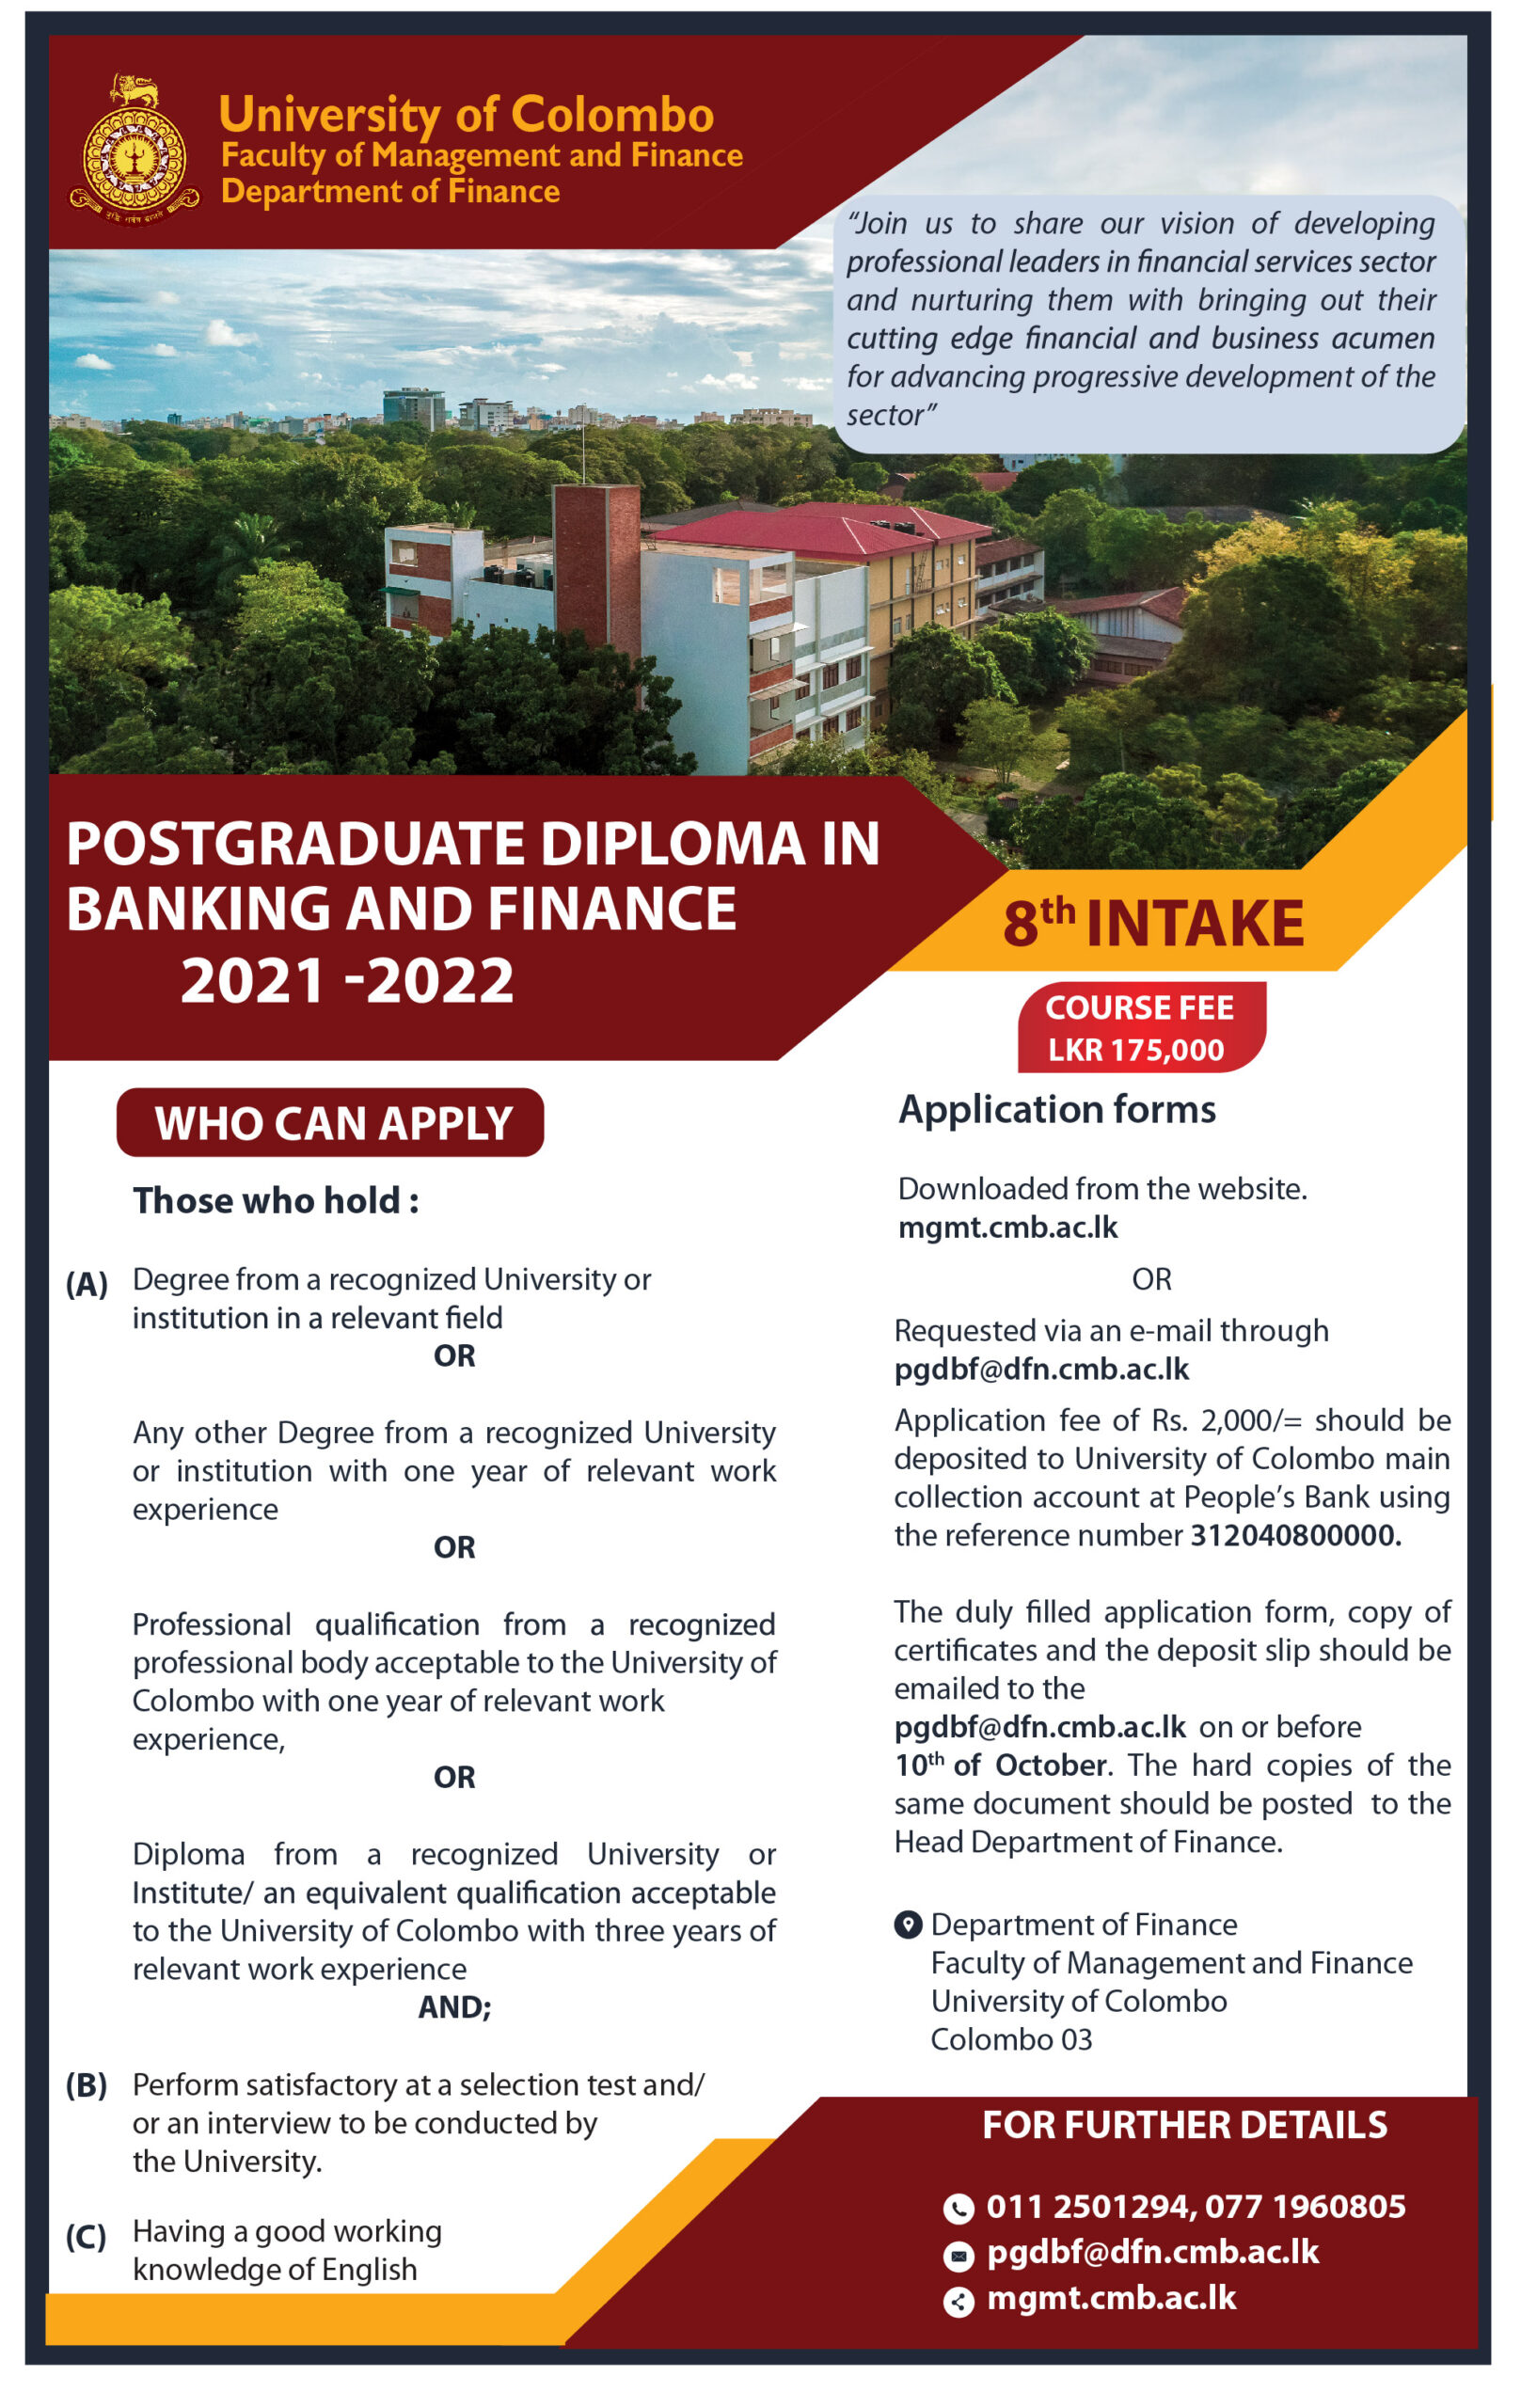 Postgraduate Diploma in Banking and Finance (PGDBF) 2021 University of Colombo